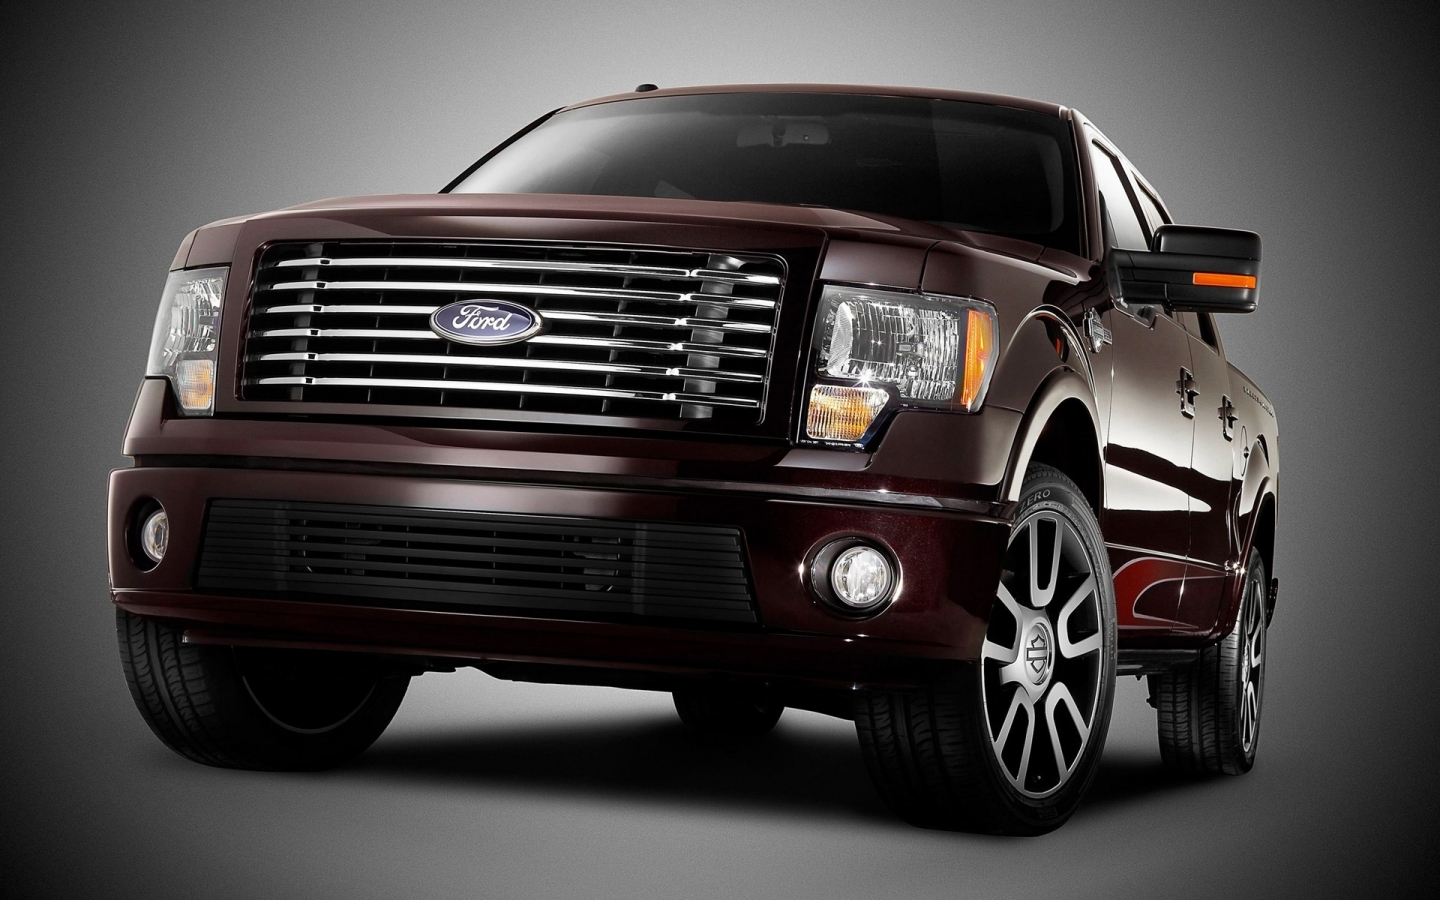 Ford F-150 Harley-Davidson 2010 for 1440 x 900 widescreen resolution